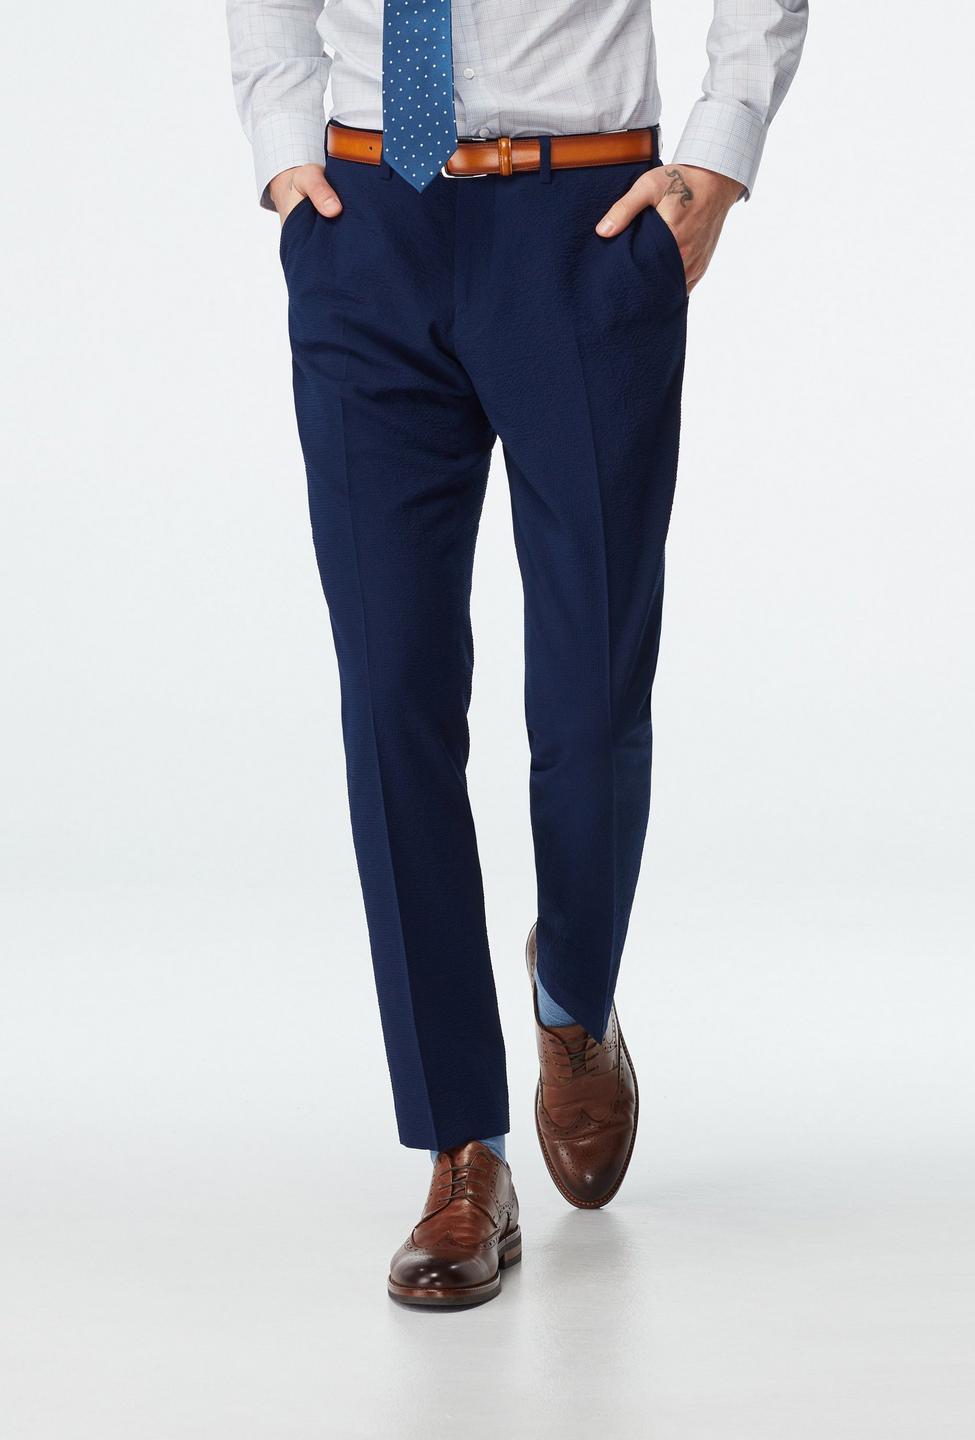 Navy pants - Stapleford Solid Design from Seasonal Indochino Collection